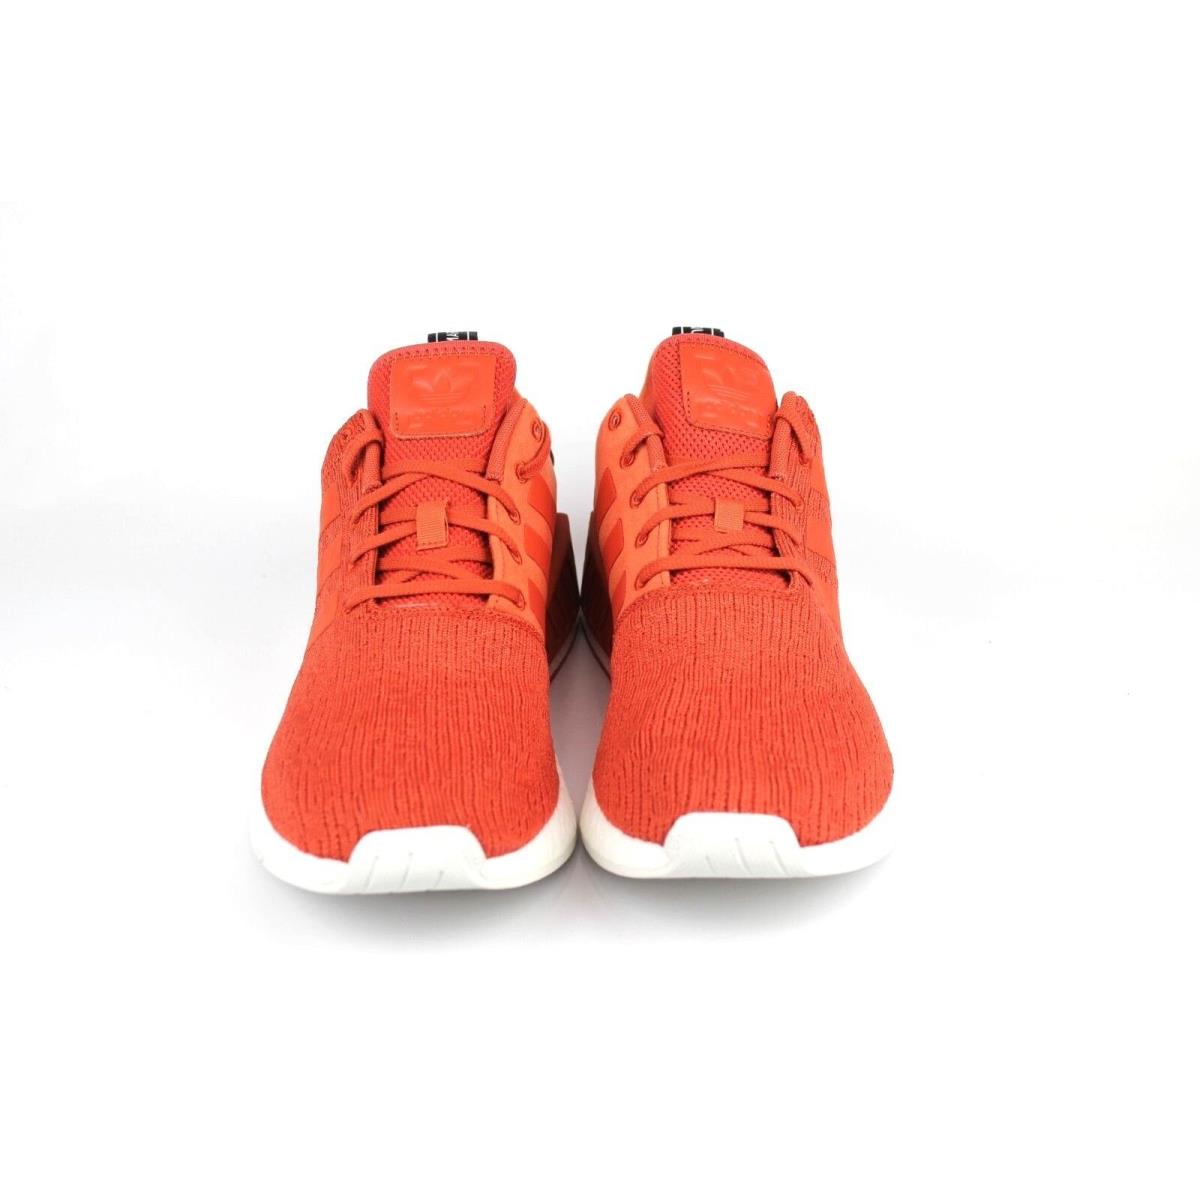 Adidas shoes NMD - Red 0